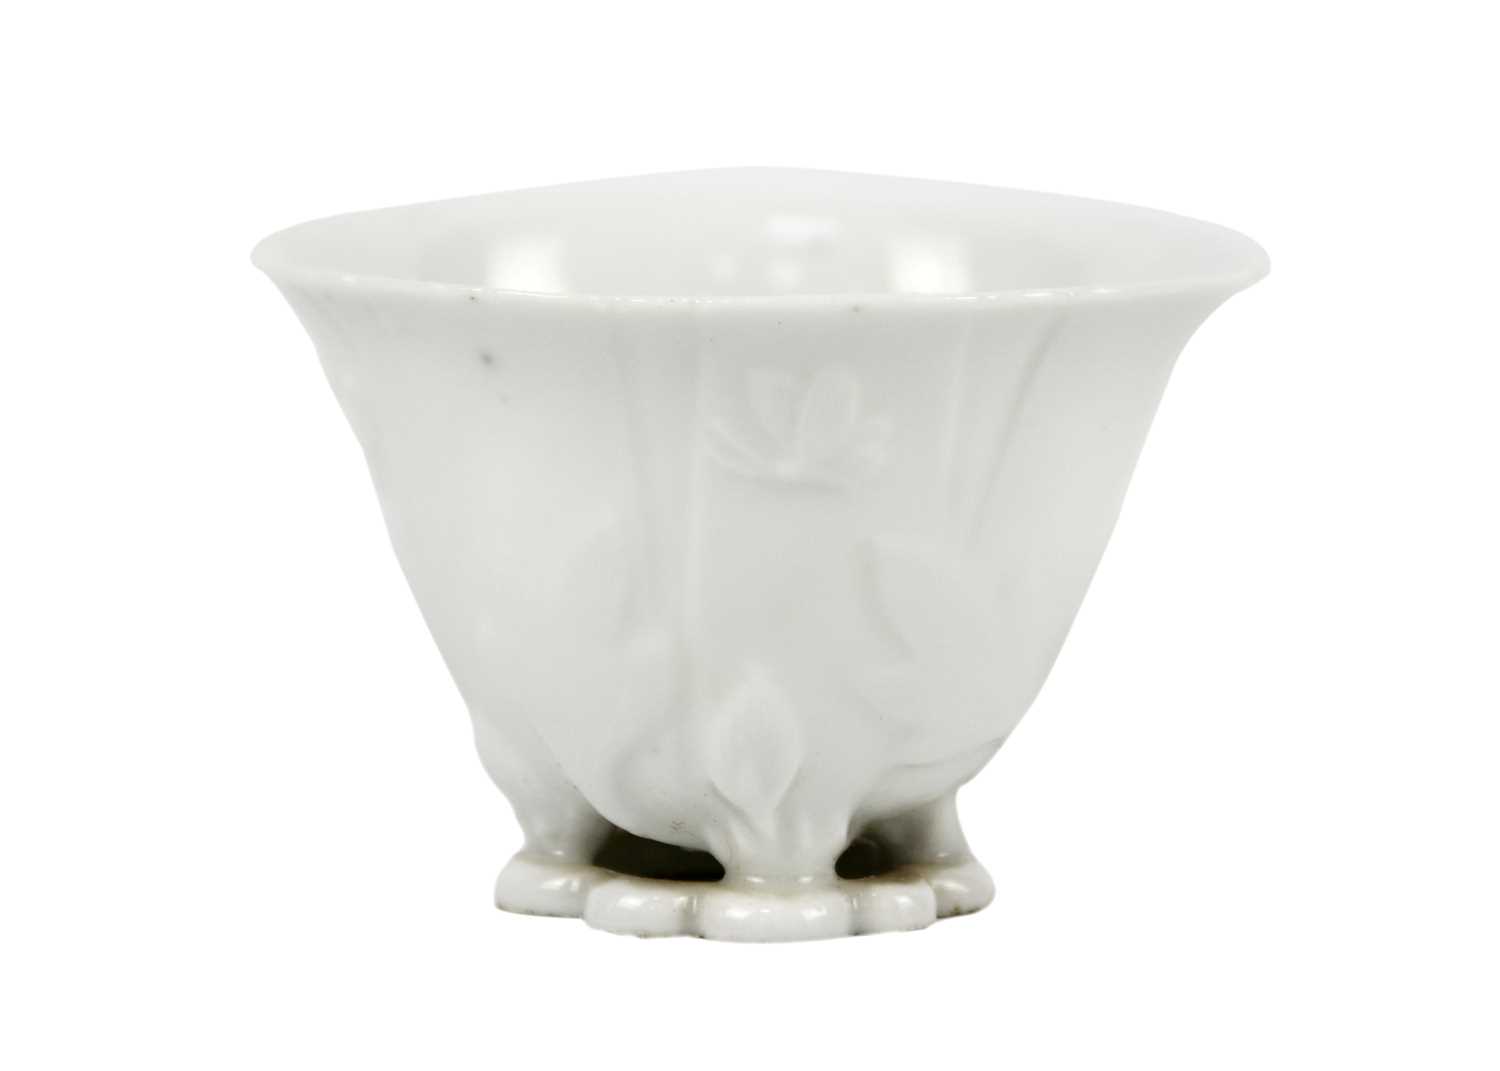 A Chinese blanc de chine libation cup, Qing Dynasty, 18th century. - Image 7 of 11